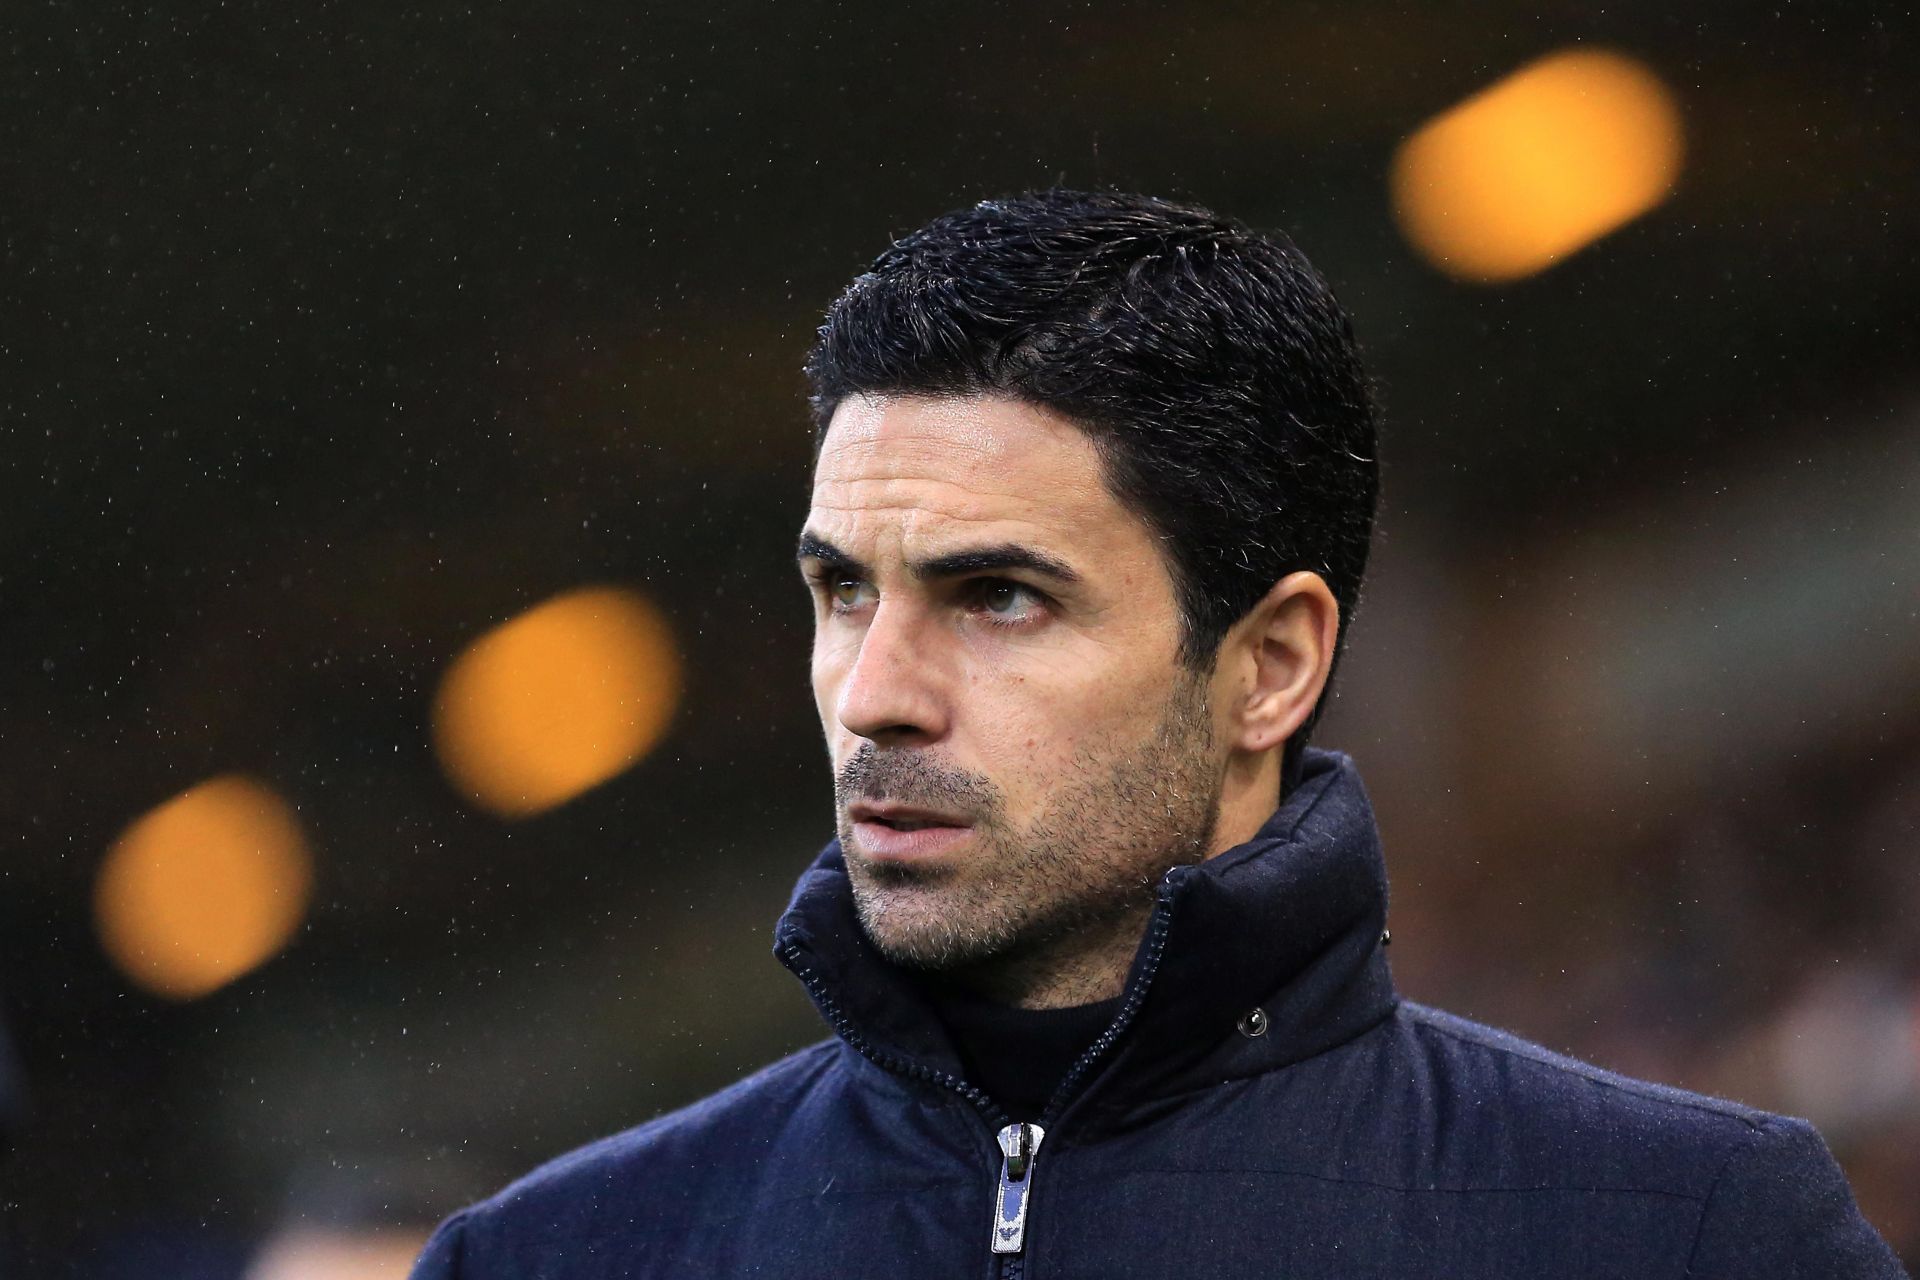 Arsenal manager Mikel Arteta is eager to secure a top-four finish in the Premier League.